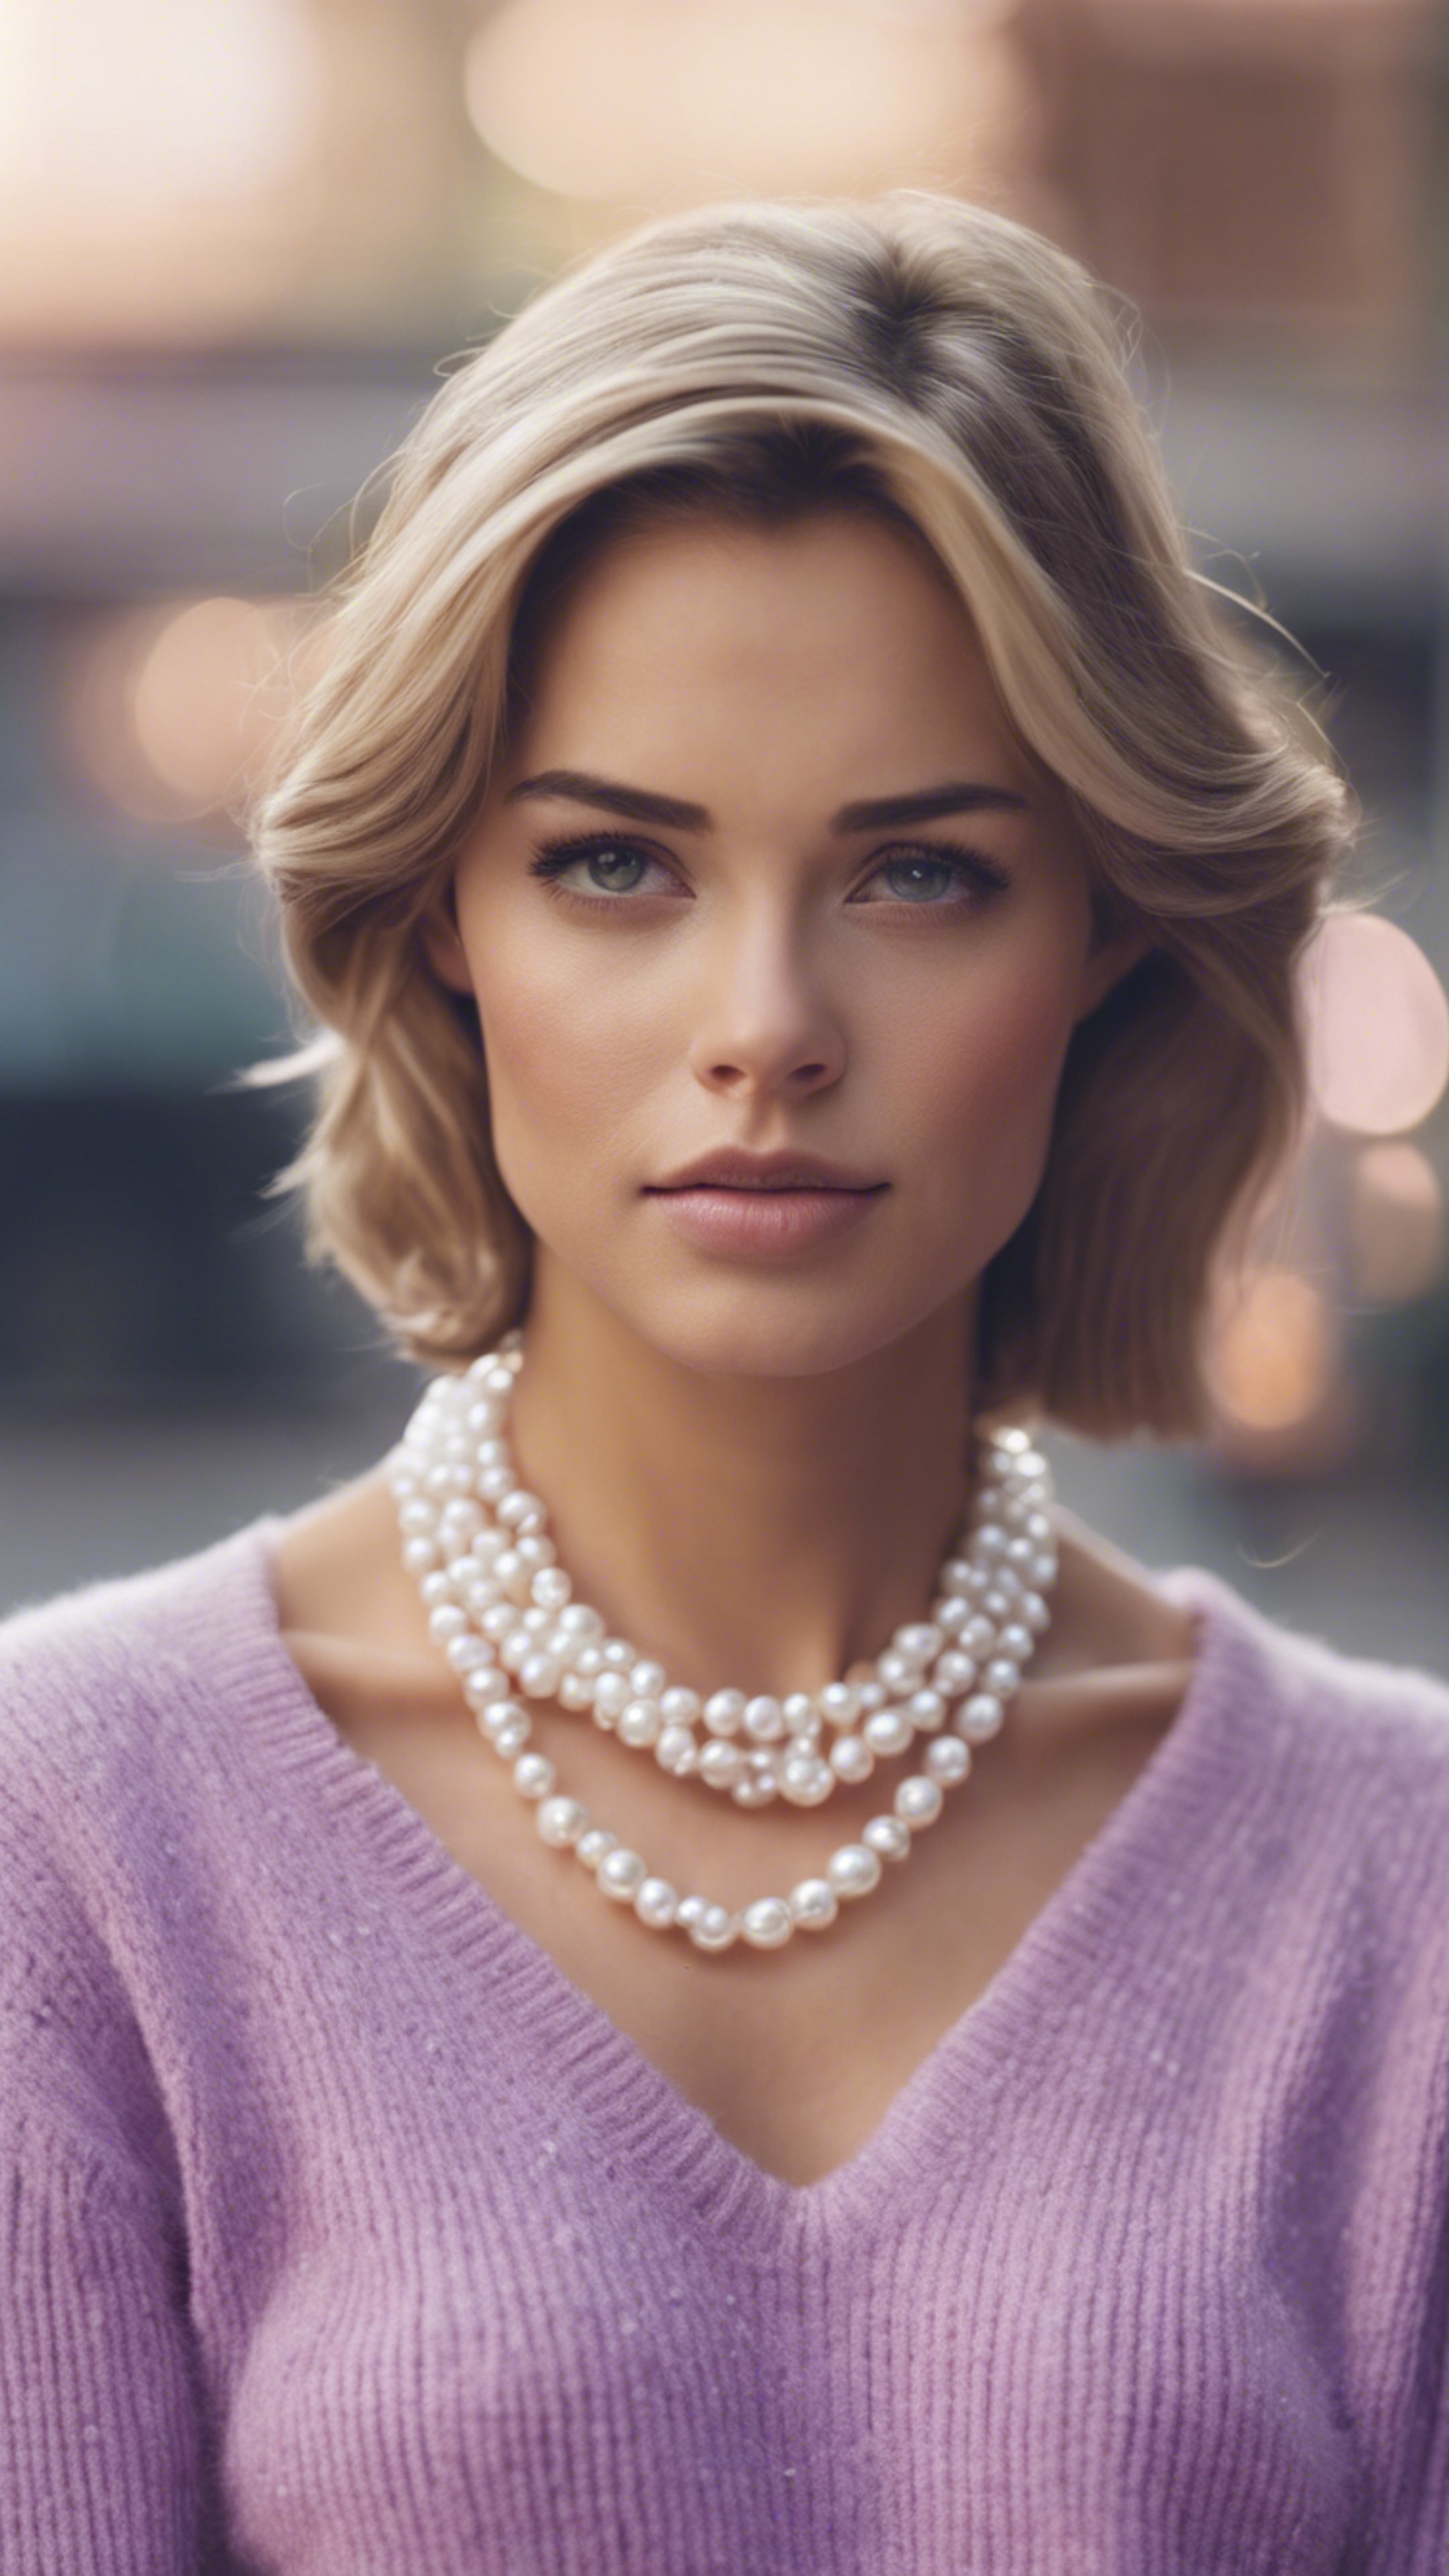 A stylish preppy woman wearing a pastel purple cashmere sweater and pearl necklace. Wallpaper[eff5c75e56ed424daf90]